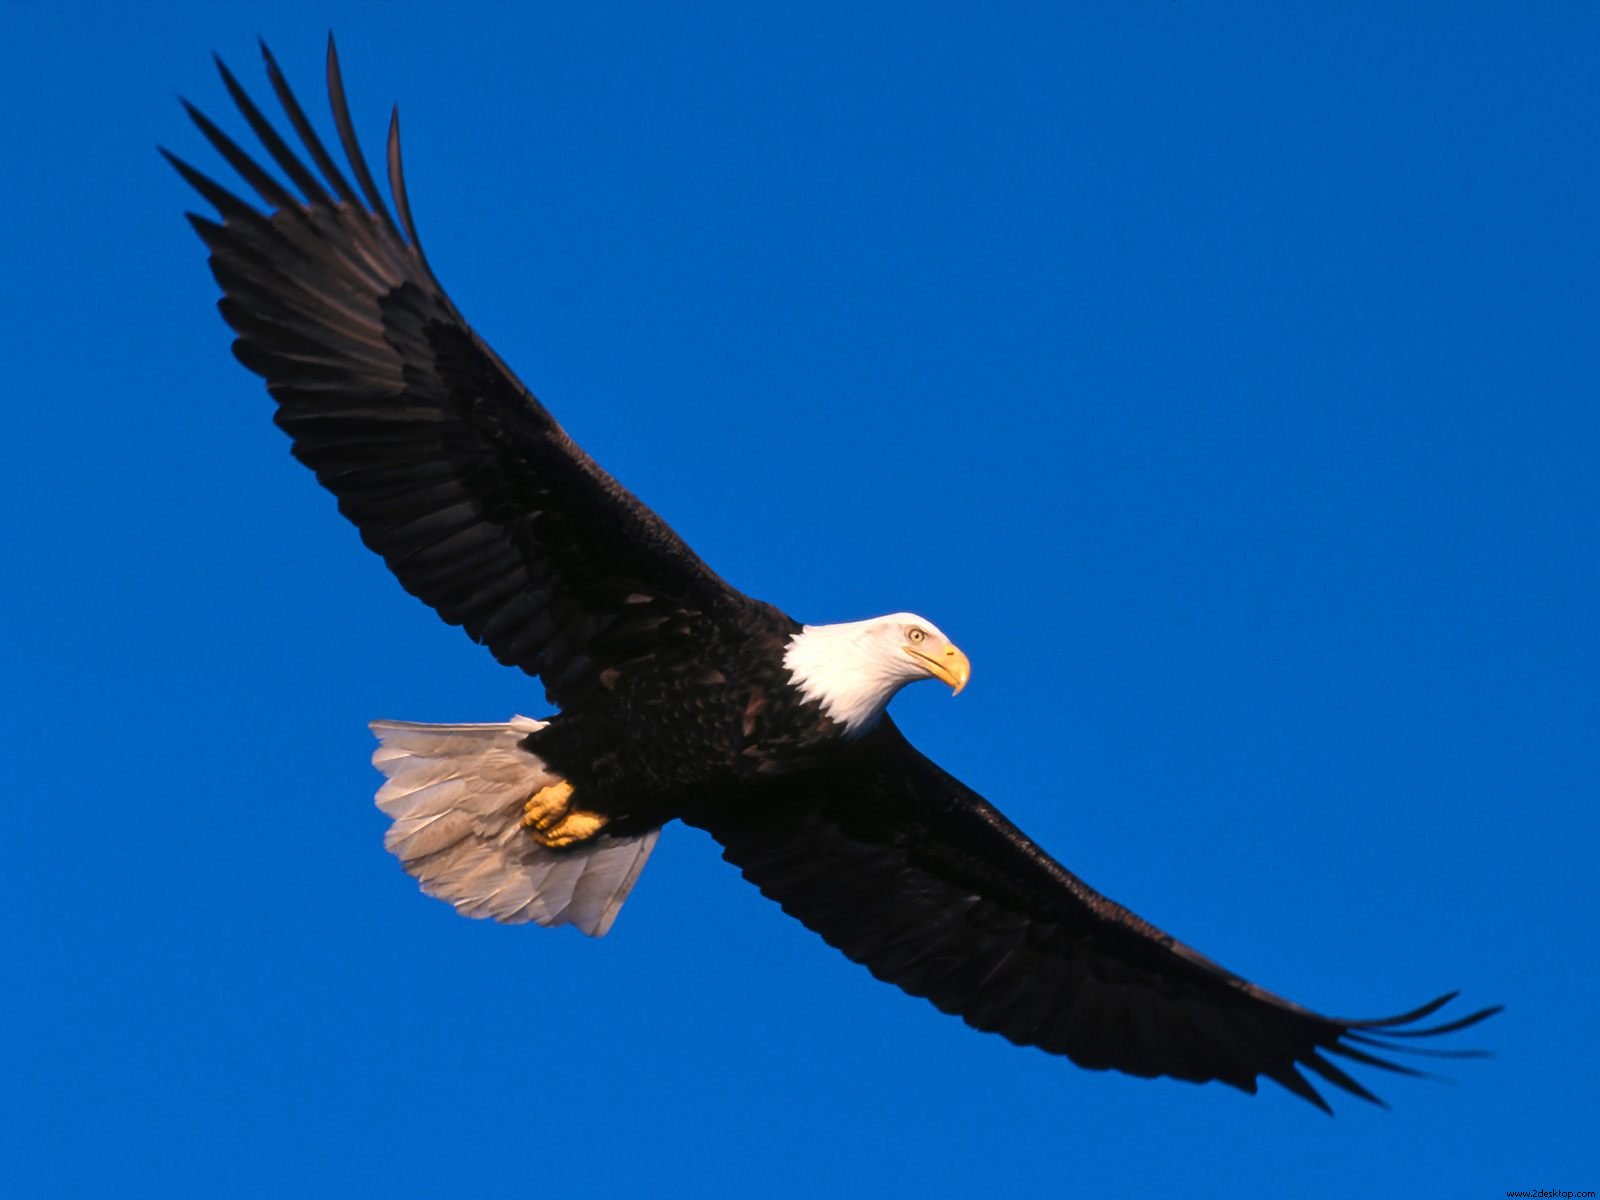 Hd Eagle Wallpapers For Mobile Phones